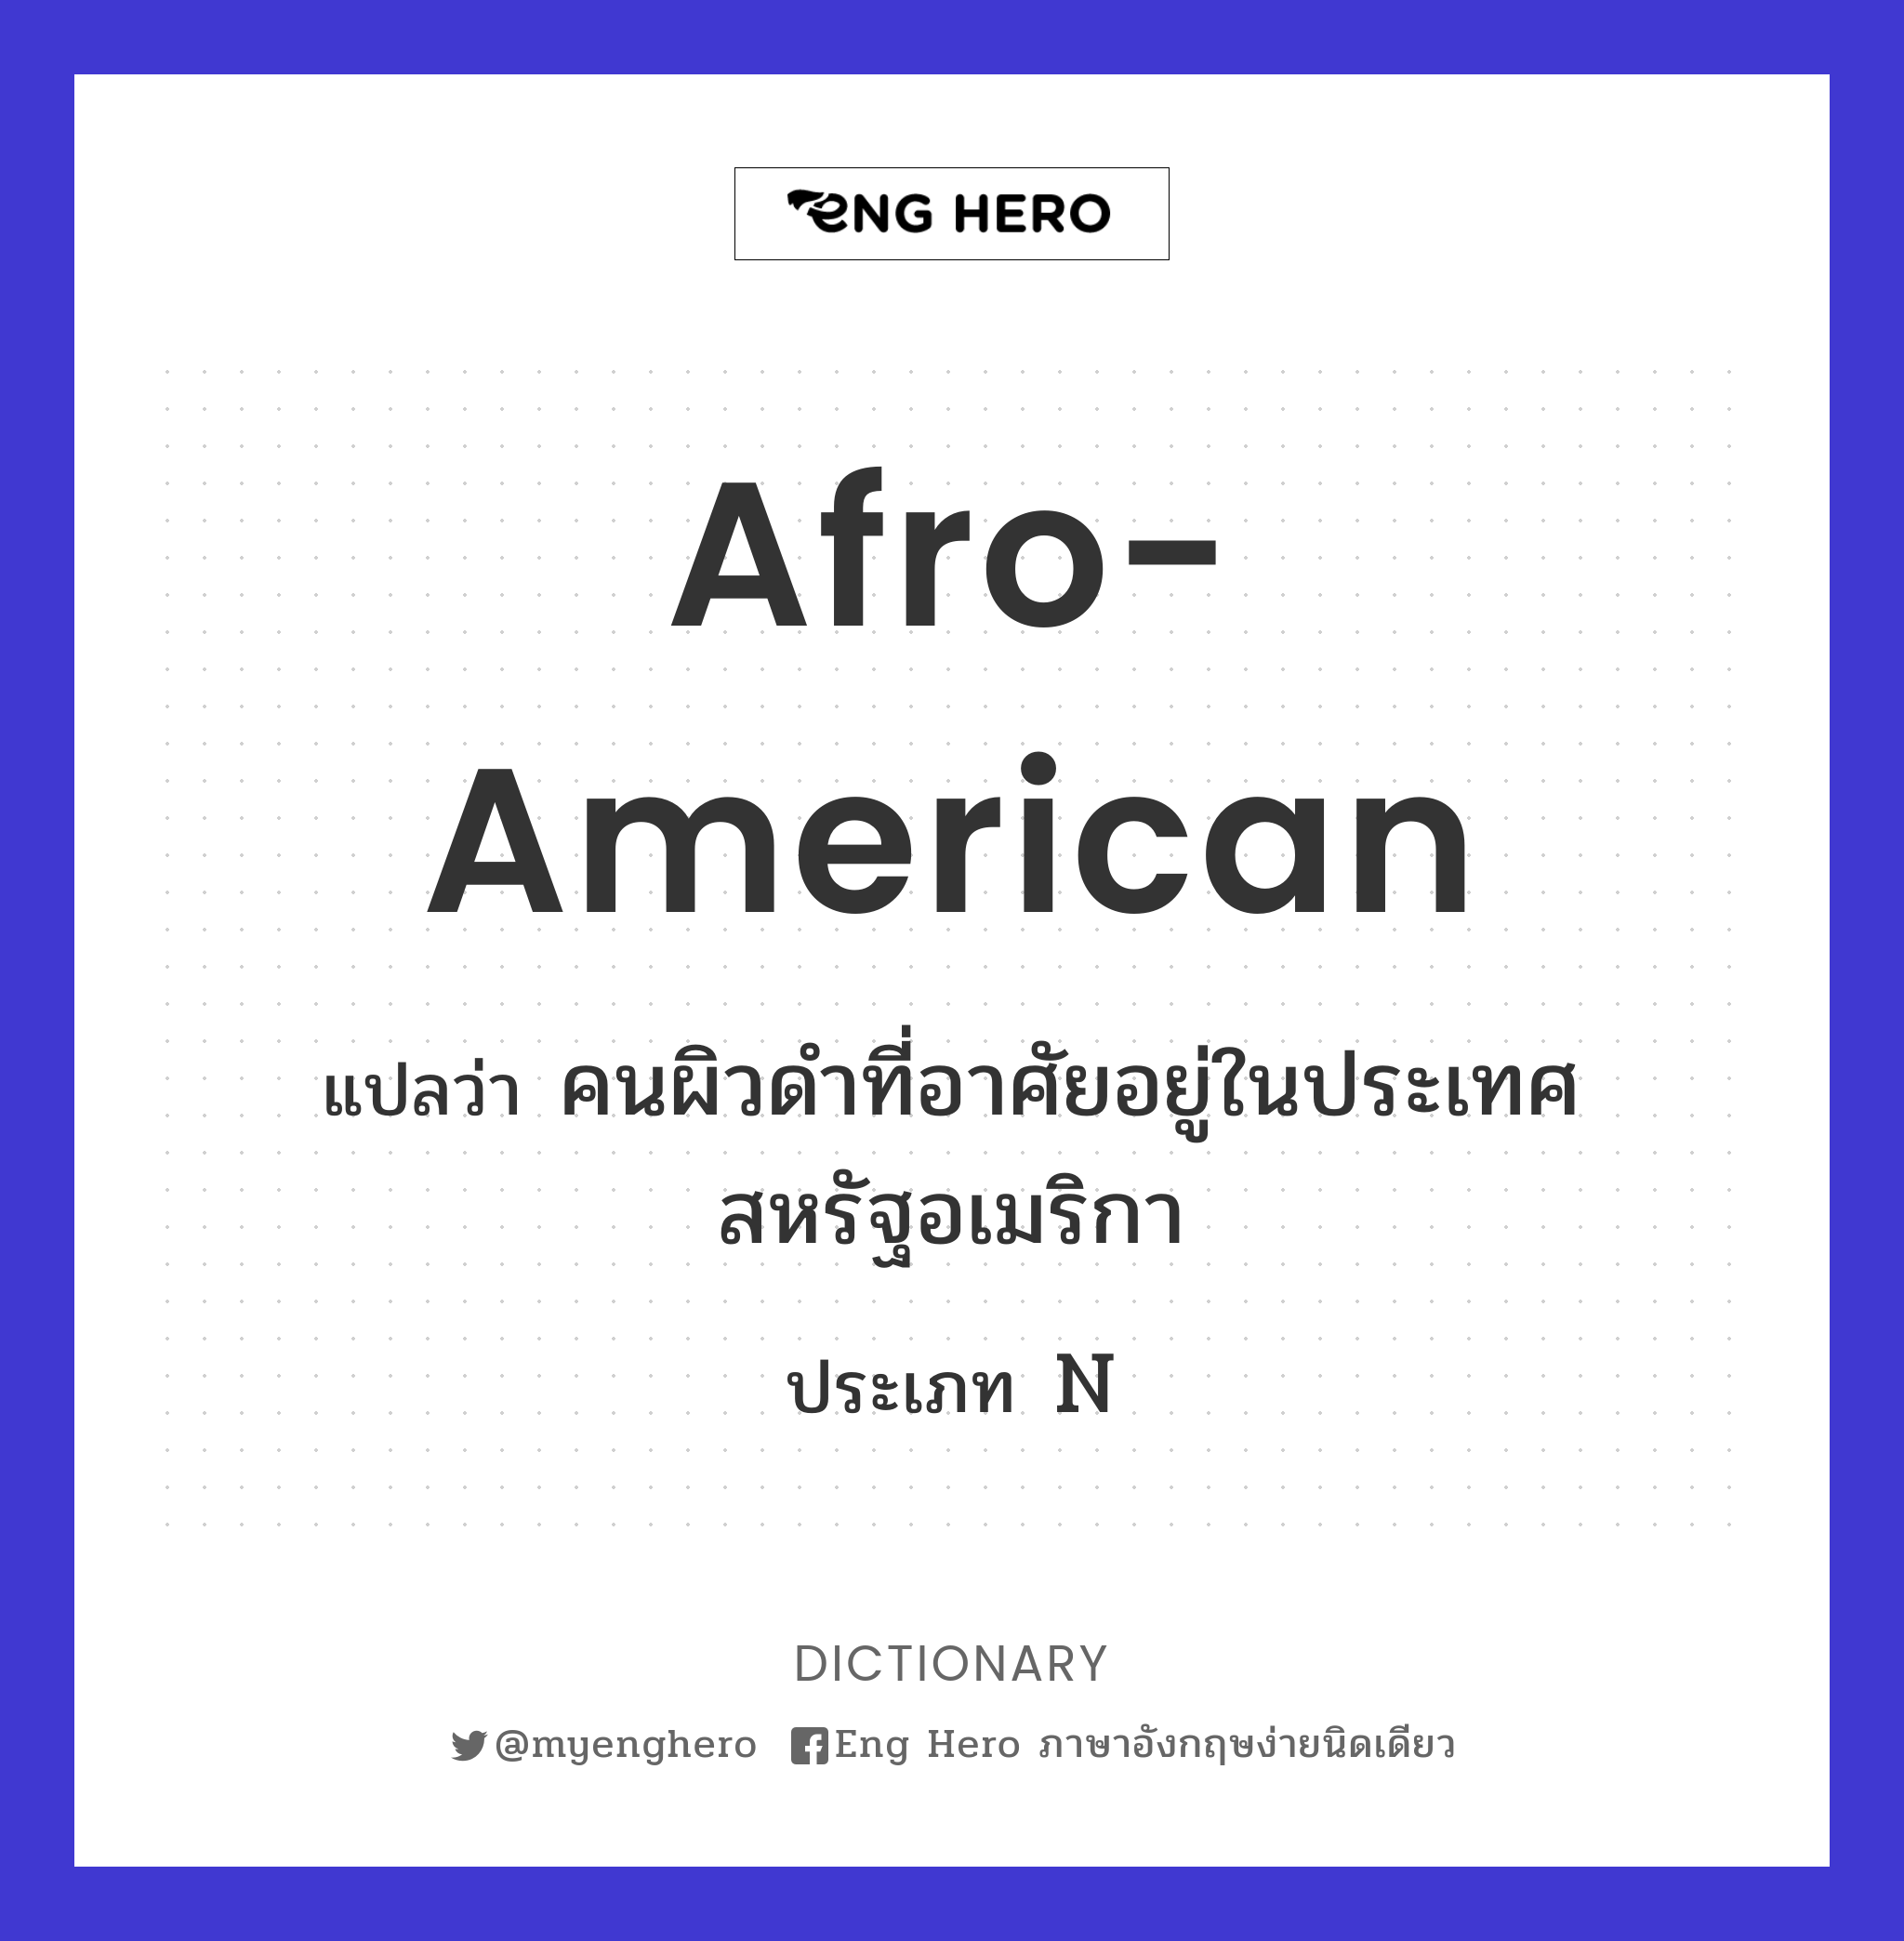 Afro-American